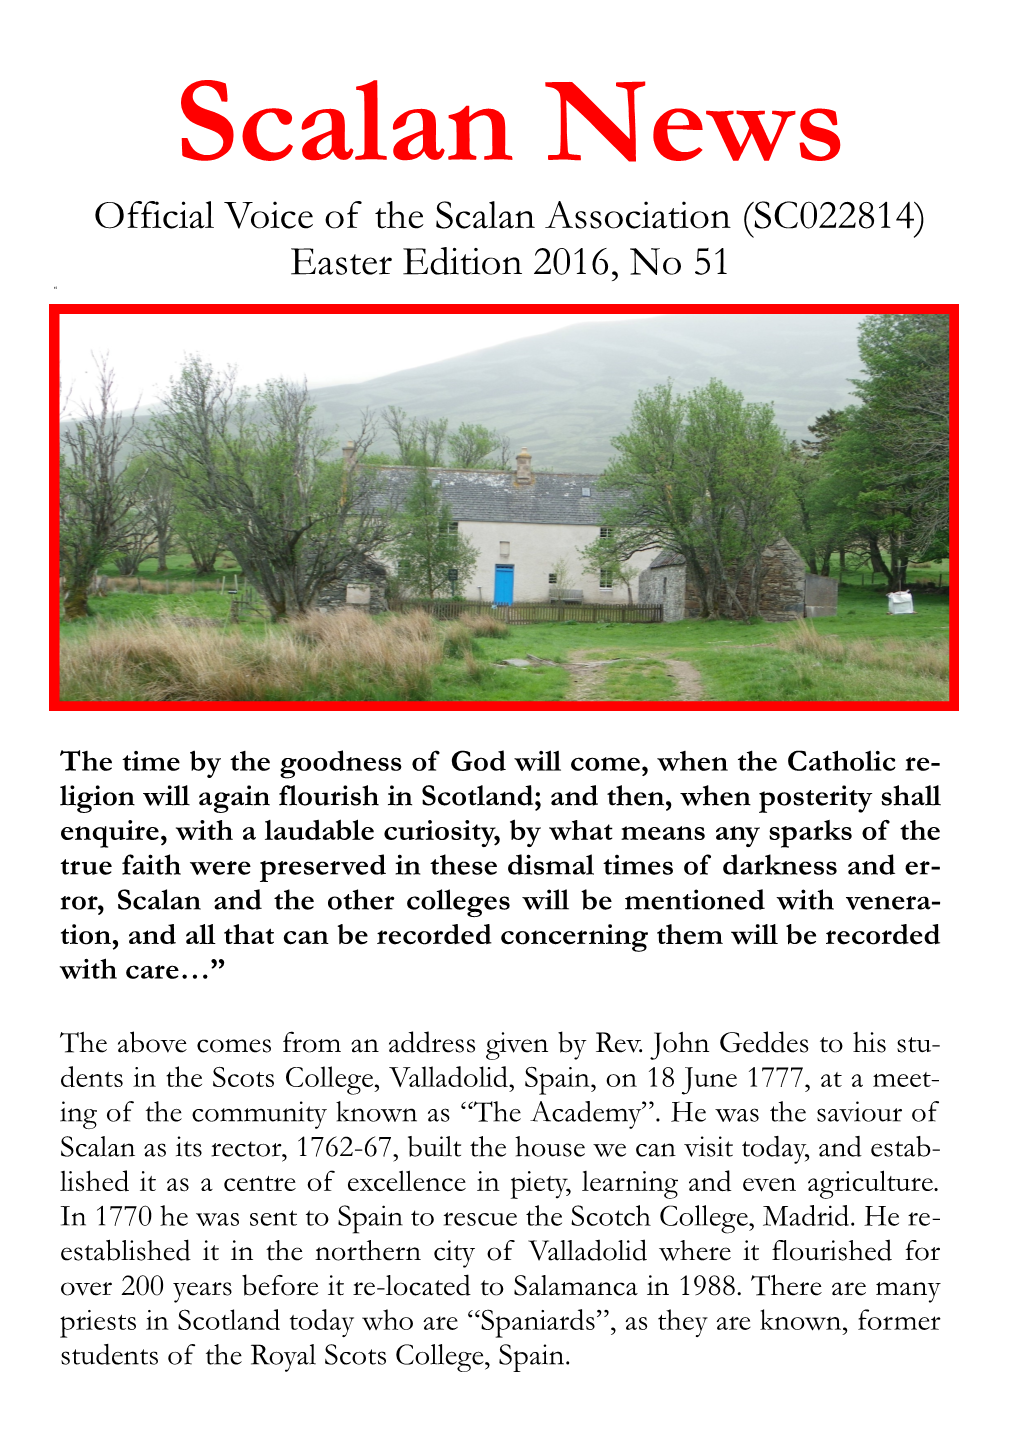 (SC022814) Easter Edition 2016, No 51